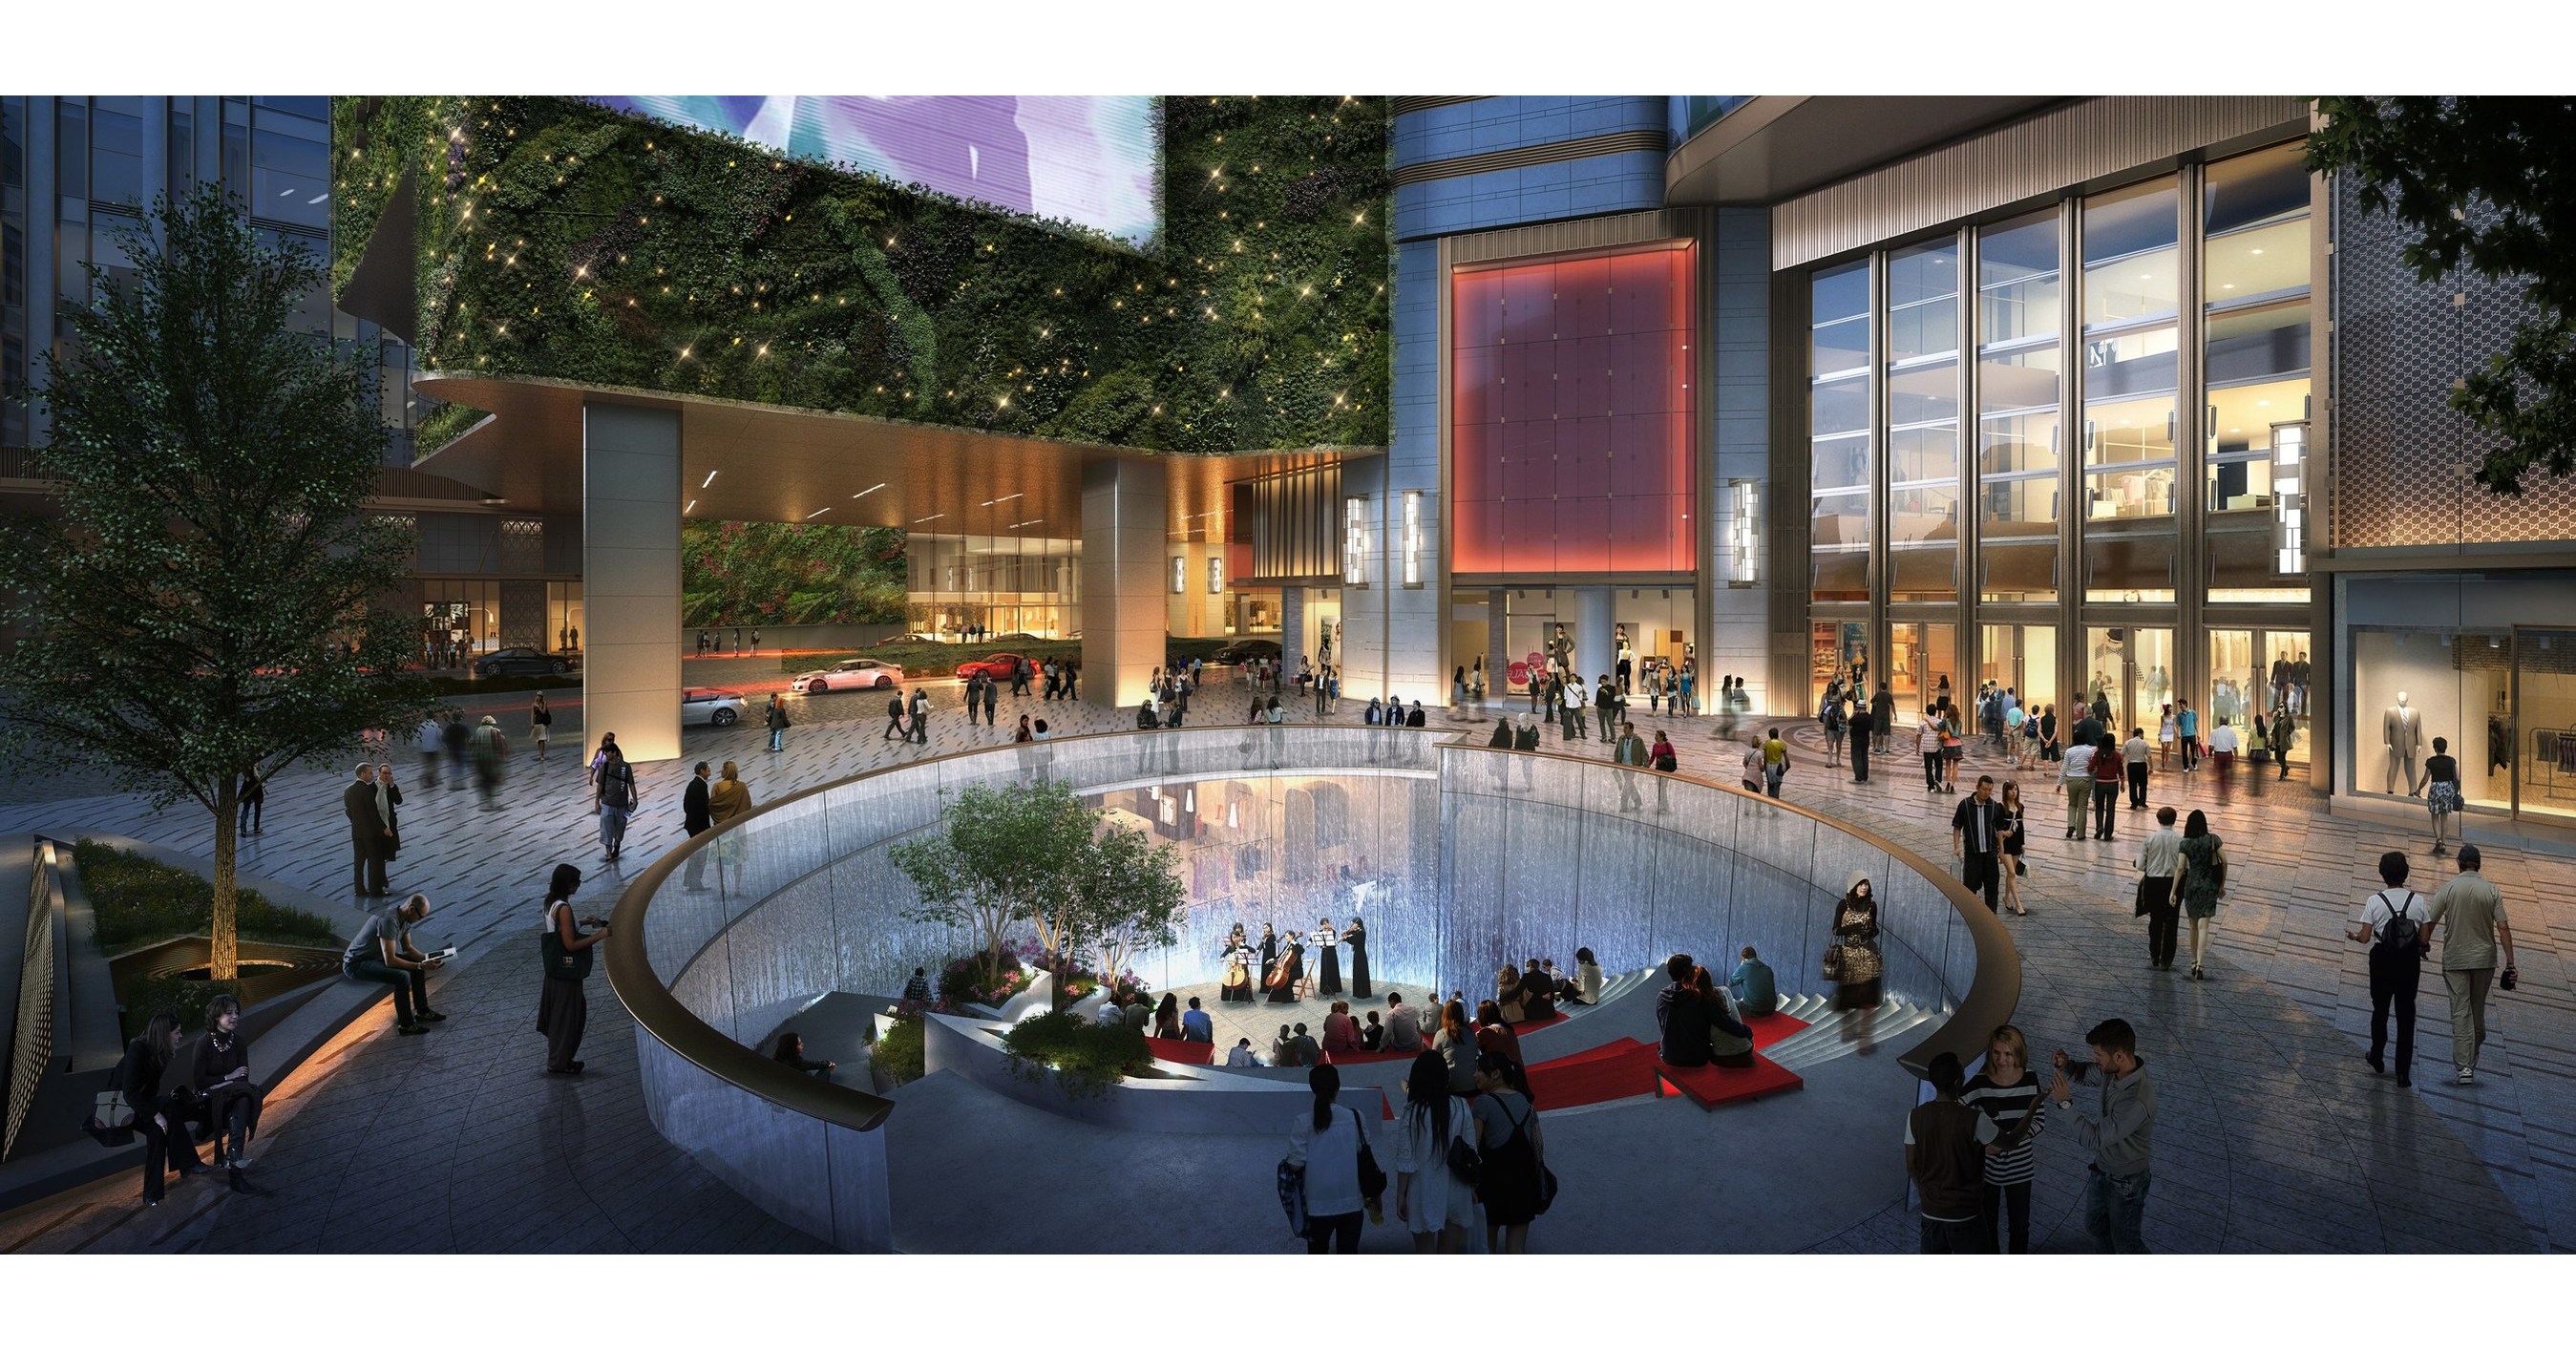 New Flagship Museum-Retail Complex "K11 MUSEA" Announced ...